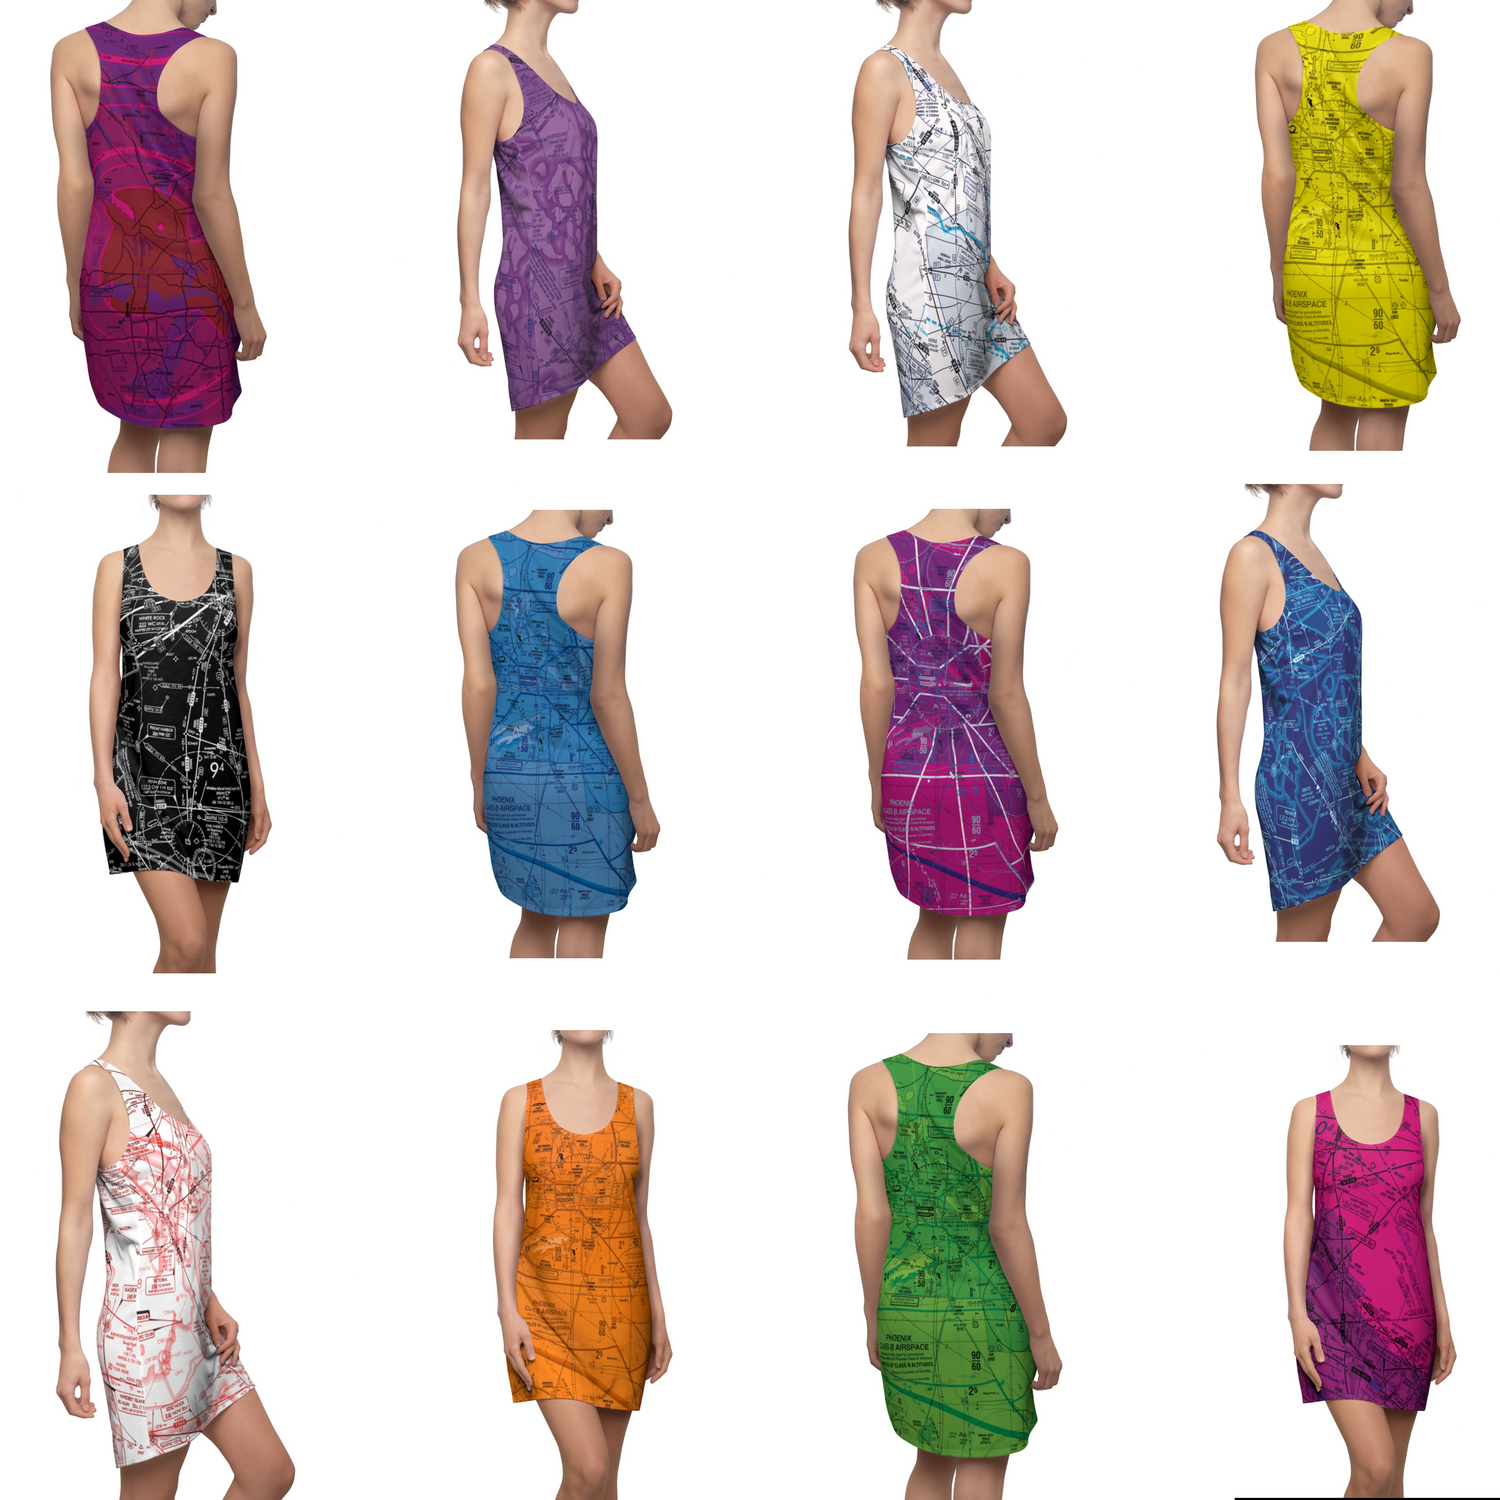 Aviation themed colorful racerback dresses